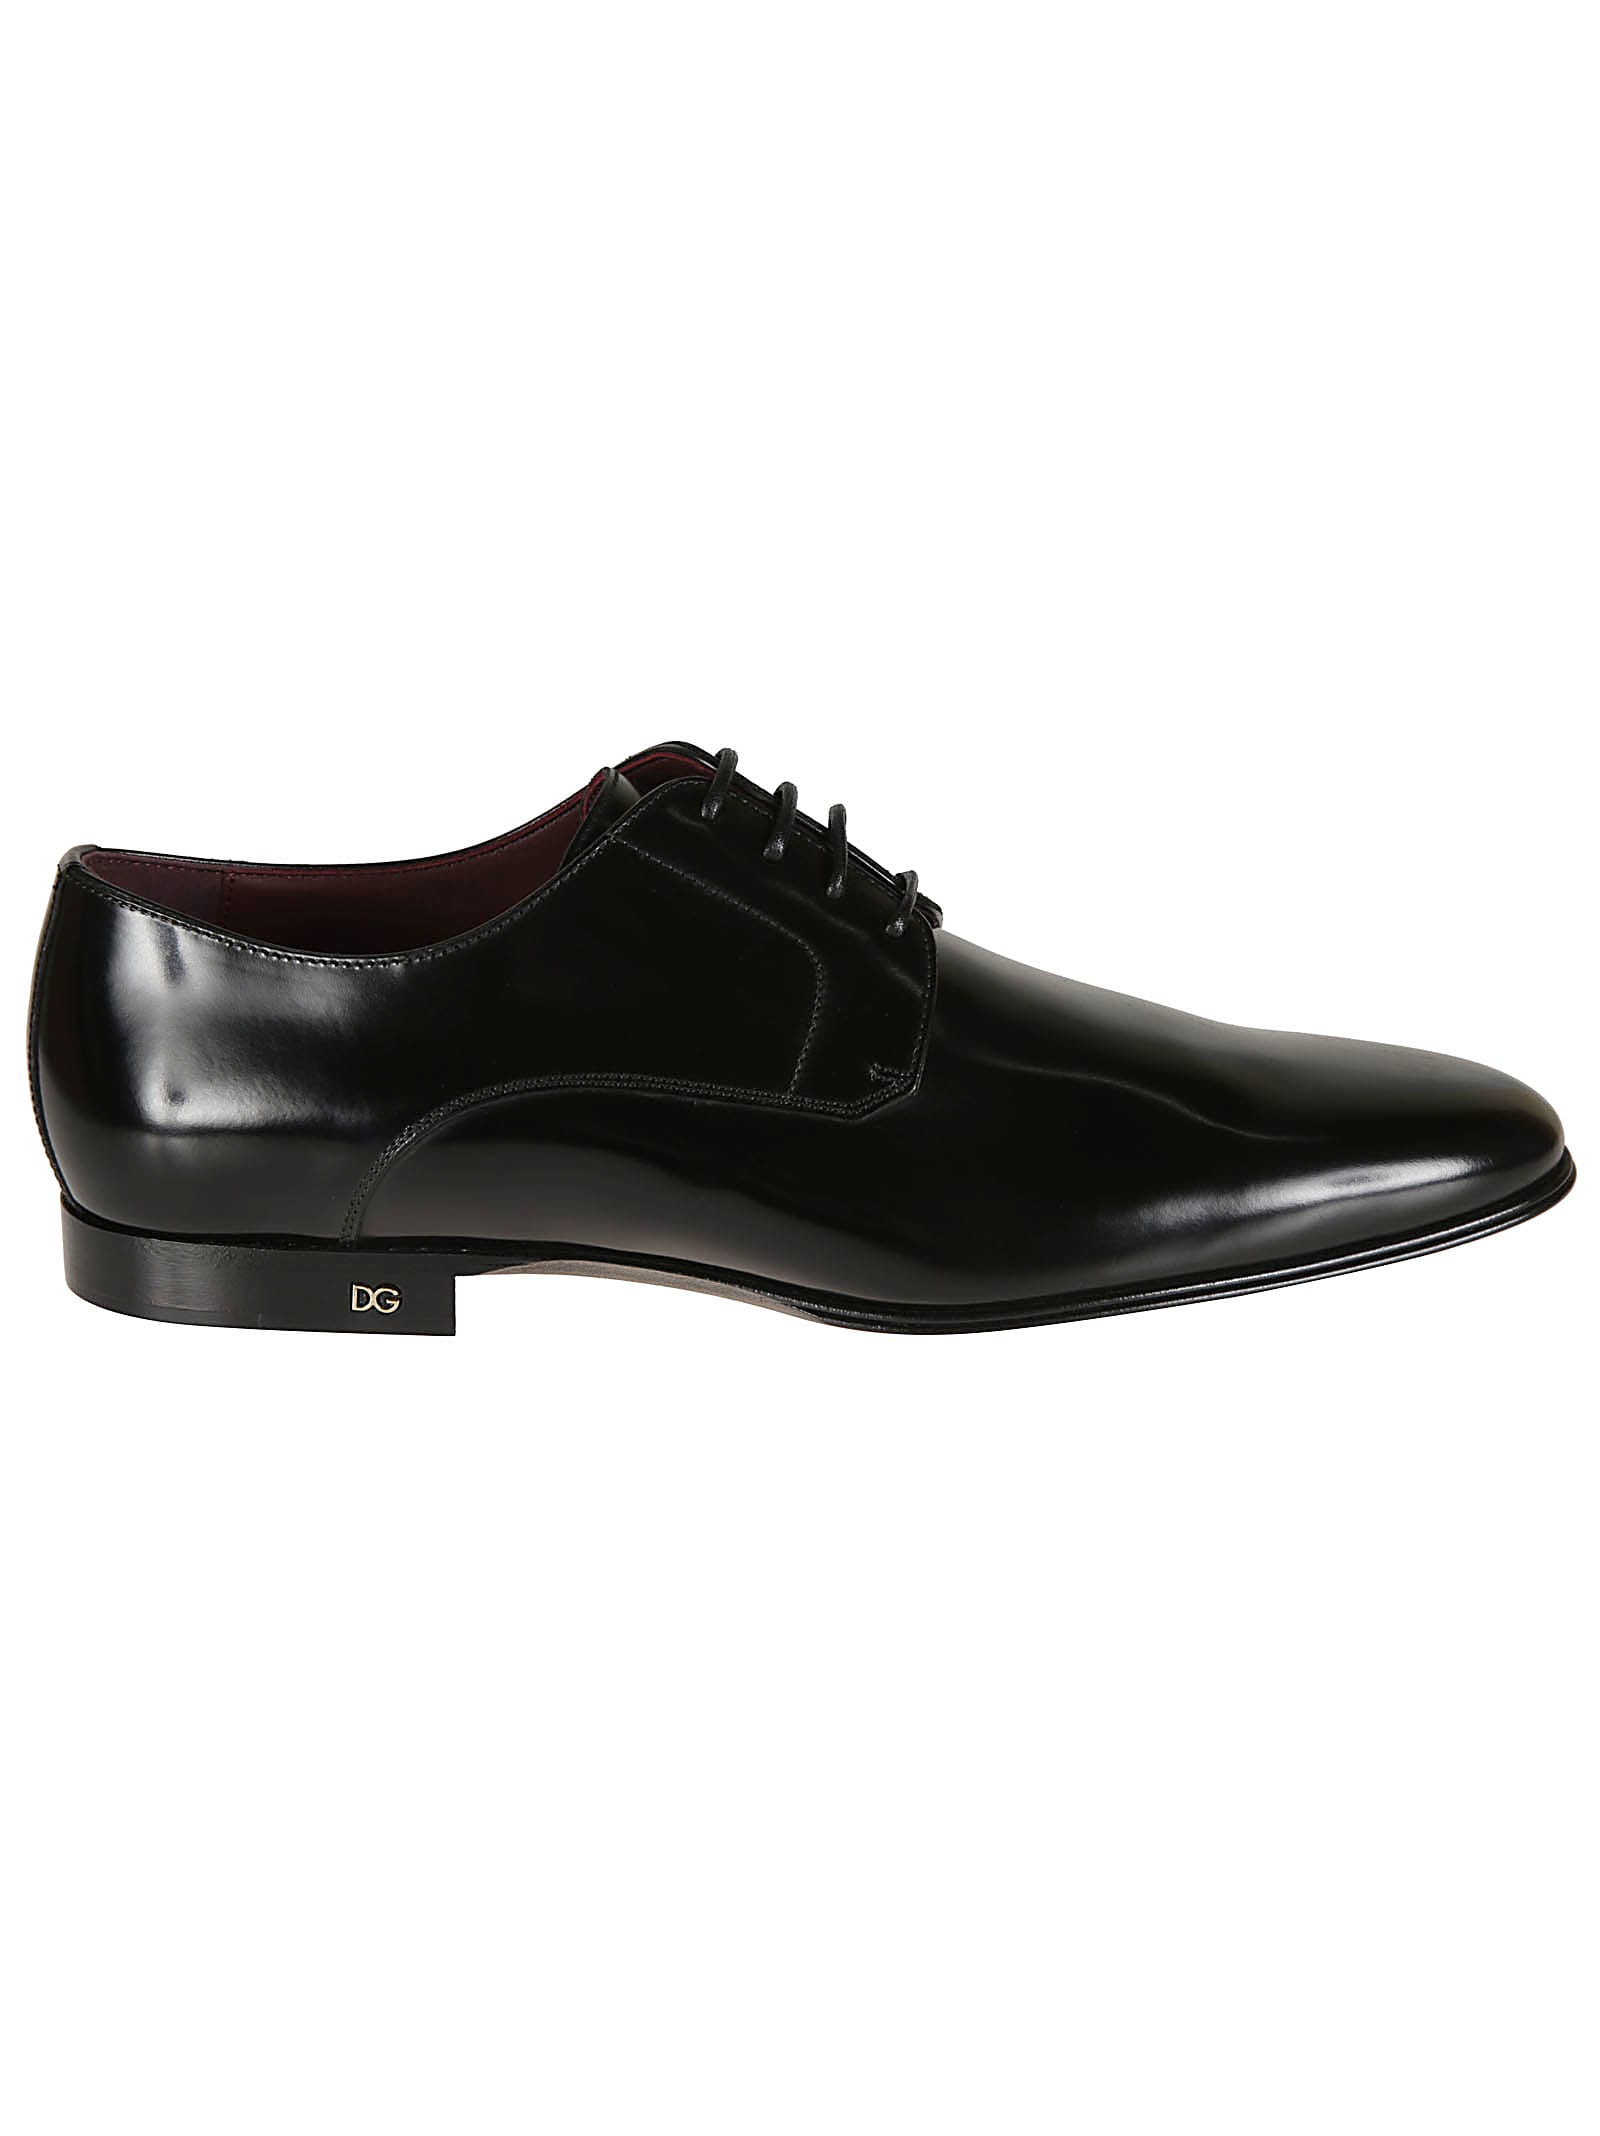 DOLCE & GABBANA CLASSIC OXFORD SHOES,11260721